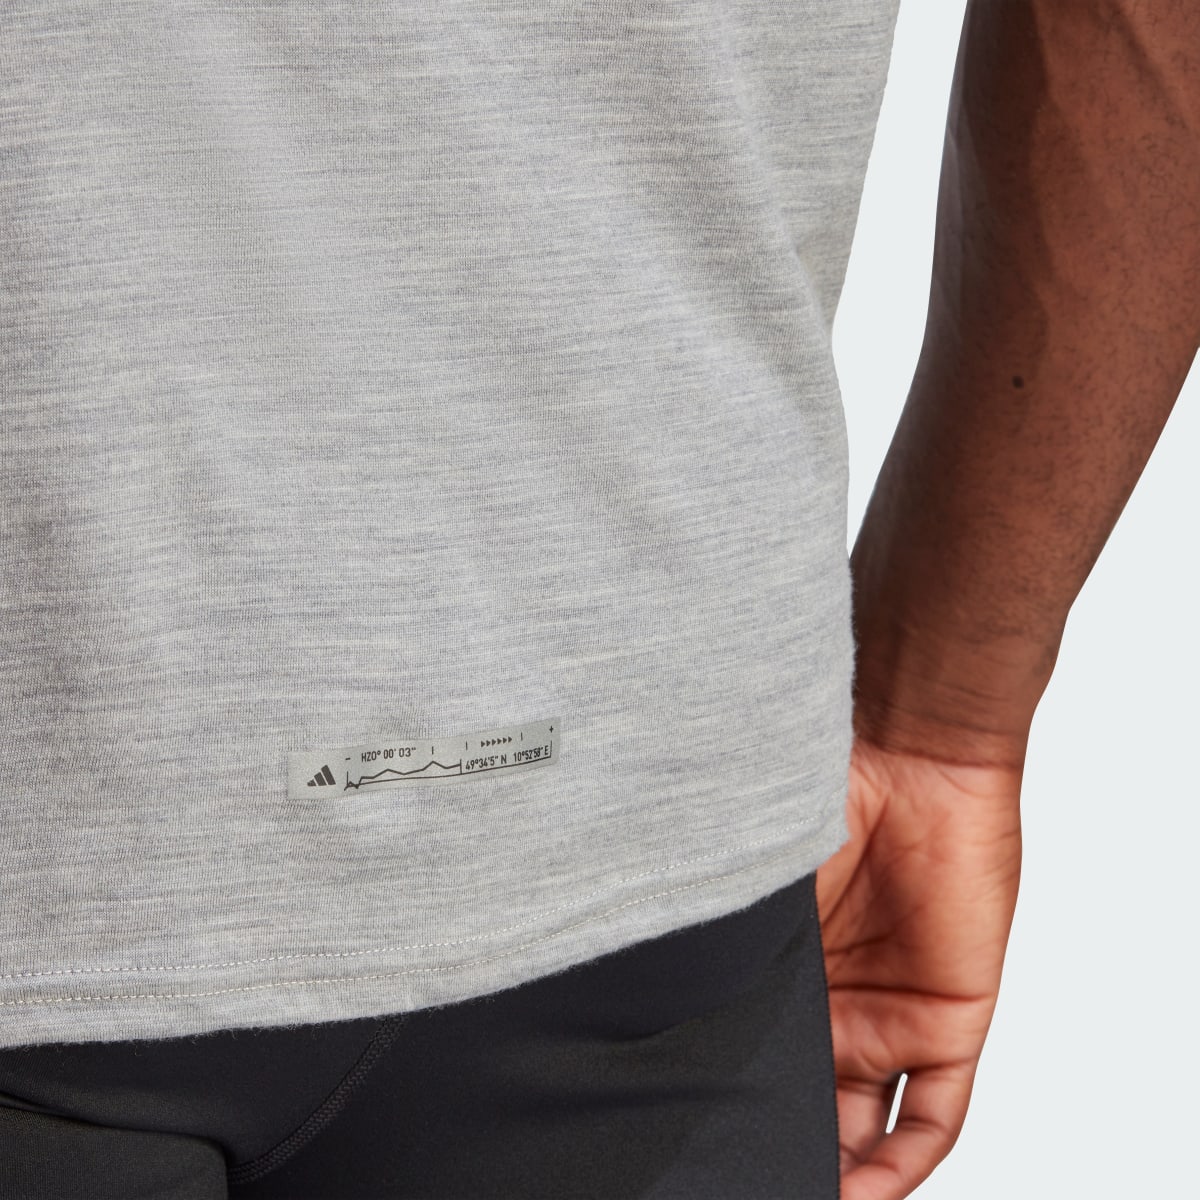 Adidas Ultimate Running Conquer the Elements Merino Tee. 7